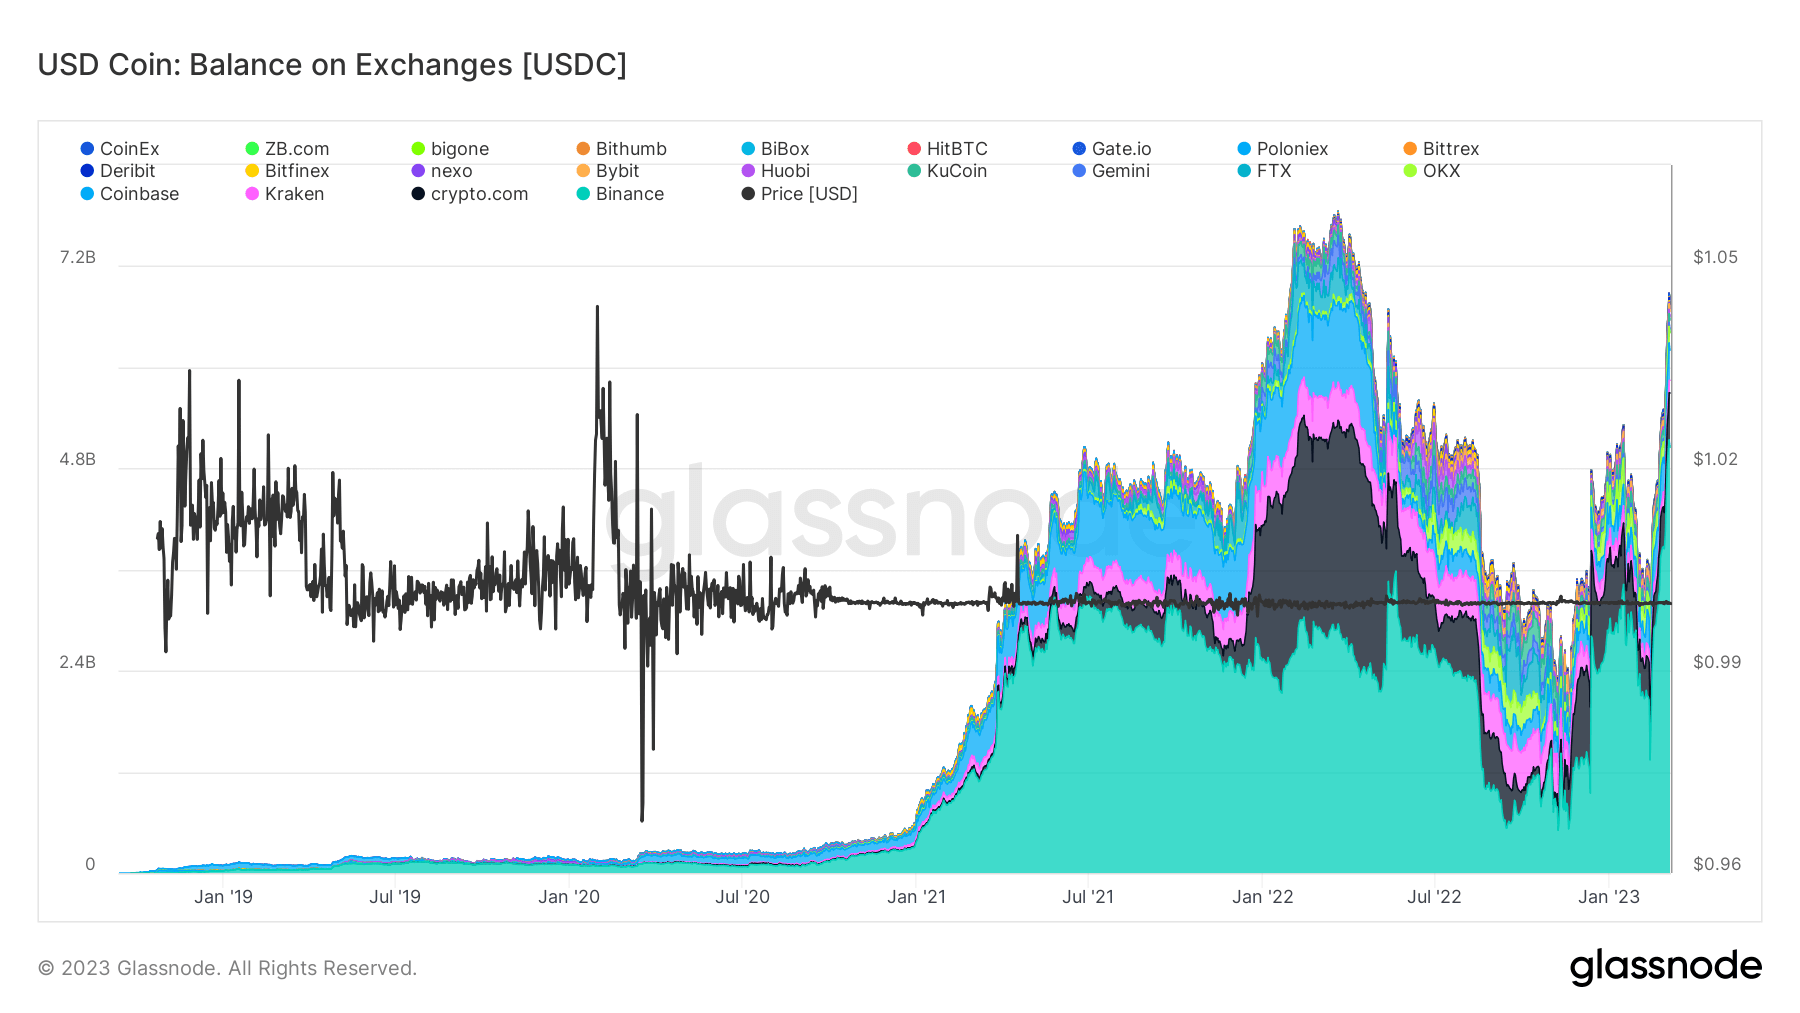 USD Coin balances held on exchanges